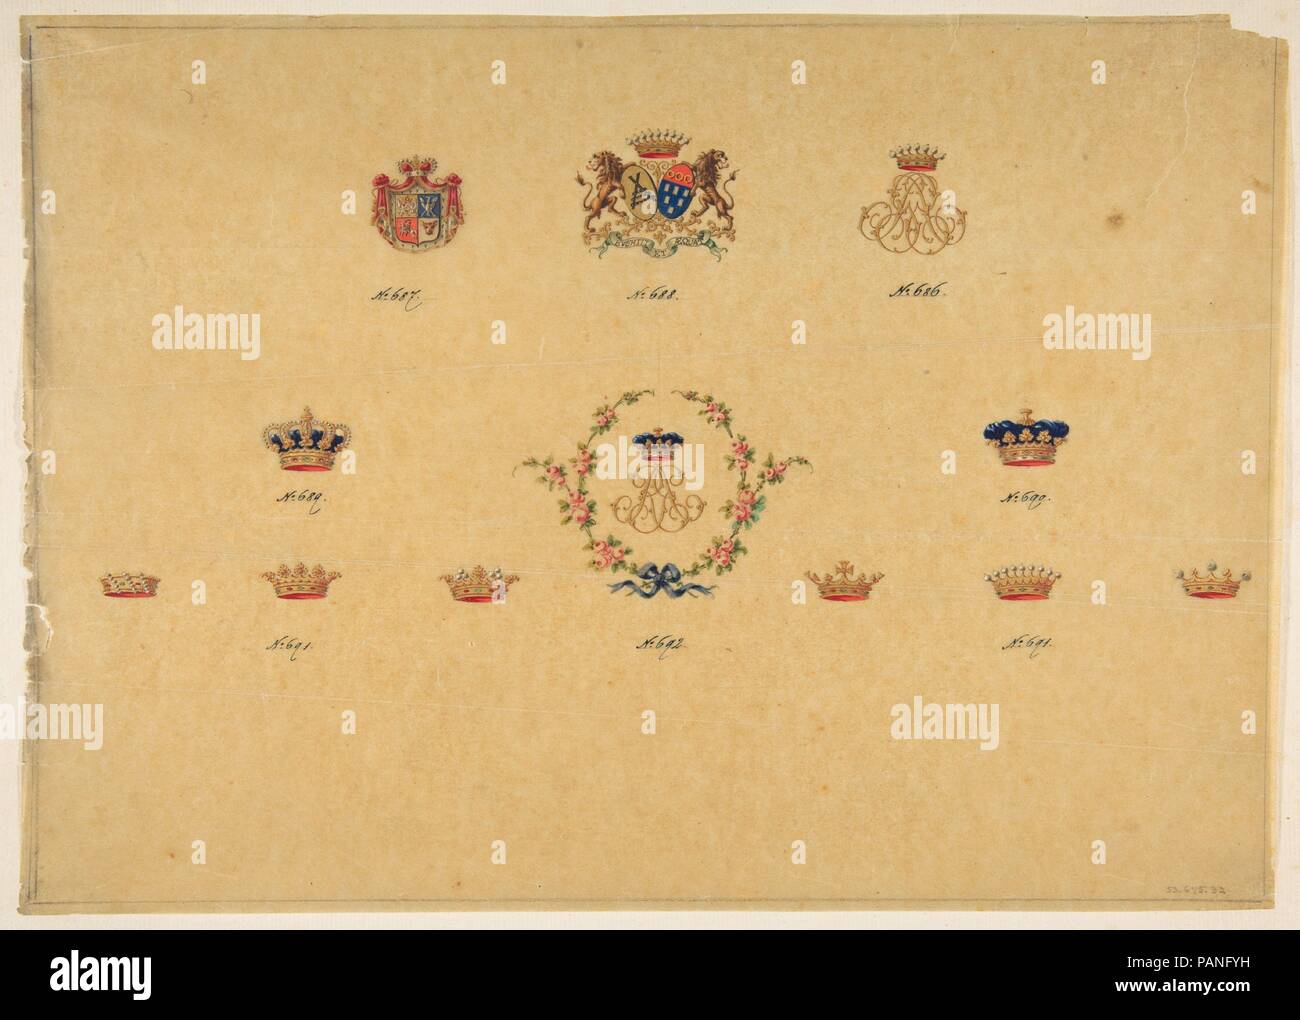 Sheet of Monogram Designs. Artist: Anonymous, French, 19th century. Dimensions: sheet: 9 11/16 x 13 9/16 in. (24.6 x 34.4 cm). Date: 19th century. Museum: Metropolitan Museum of Art, New York, USA. Stock Photo